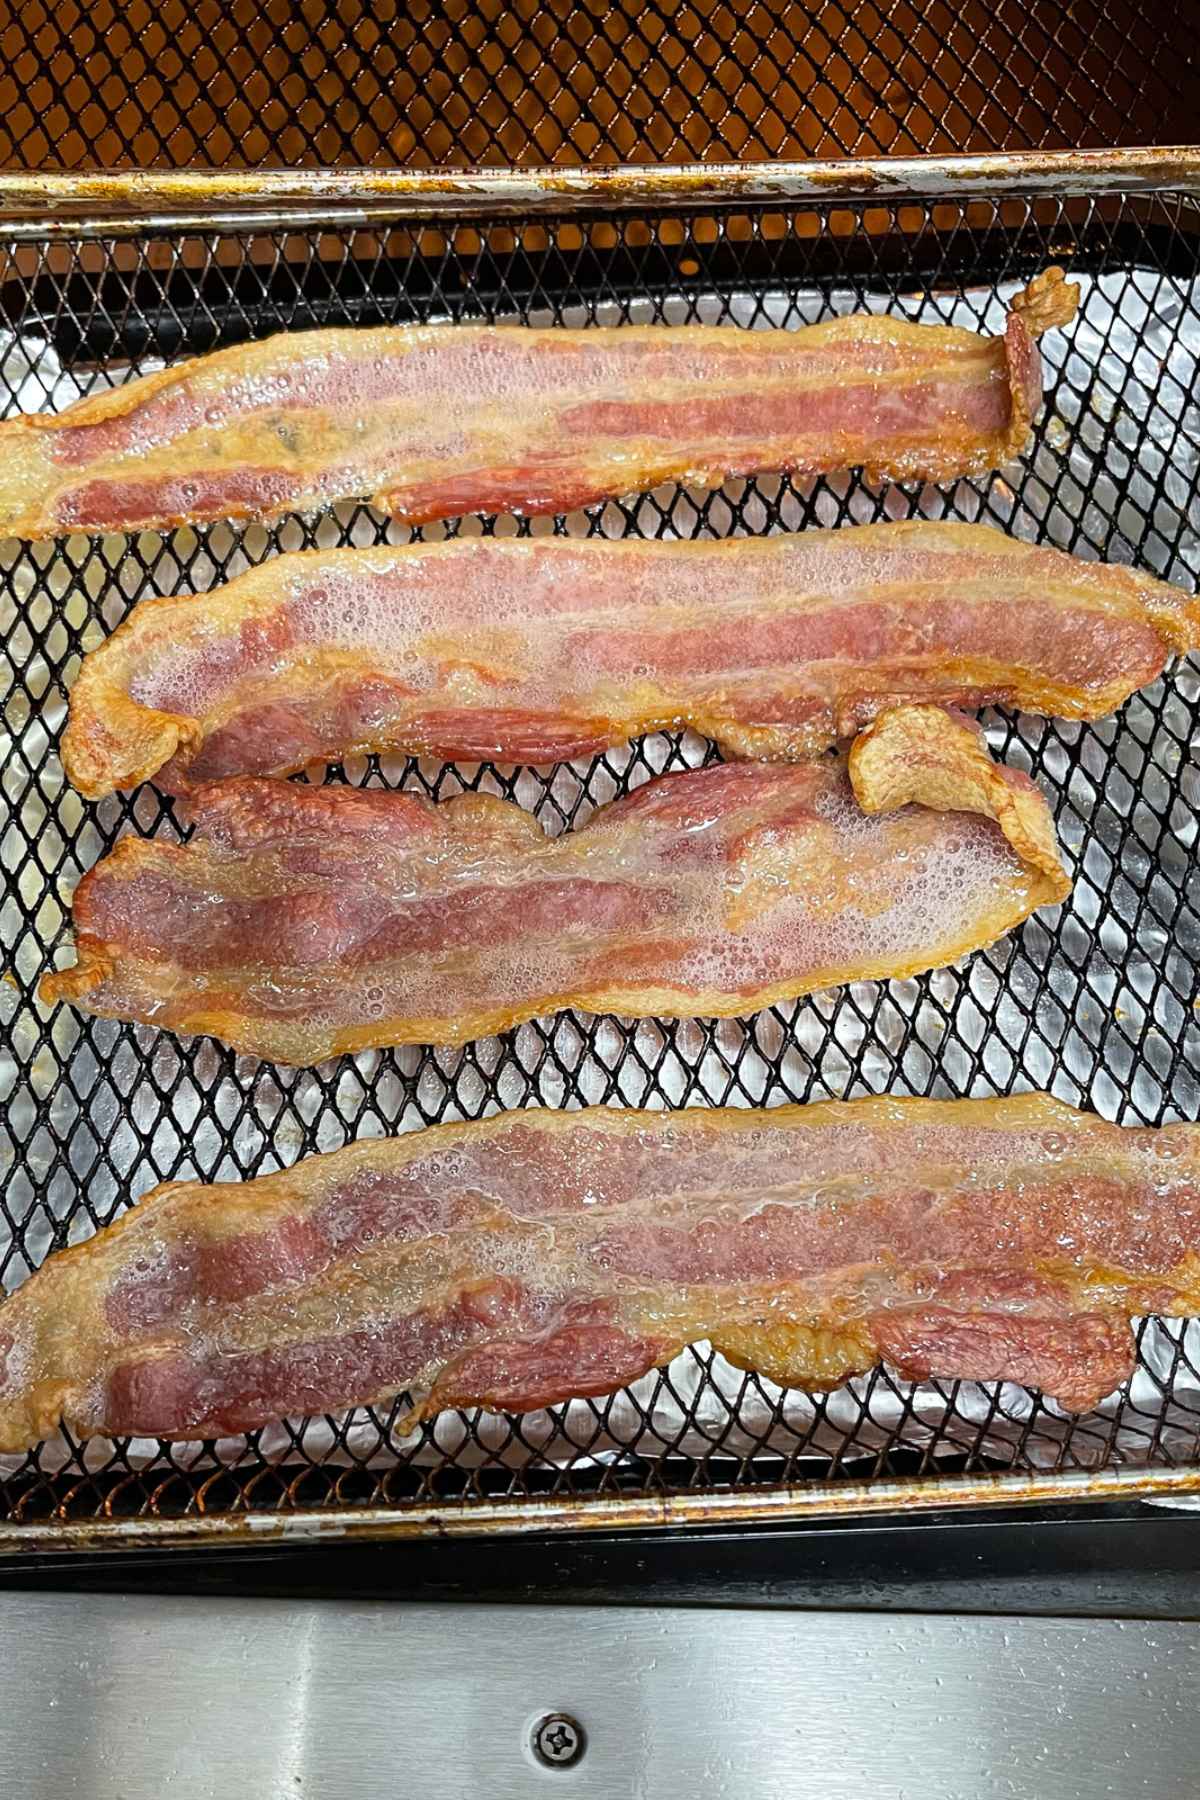 Partially cooked air fryer bacon on air fryer tray.